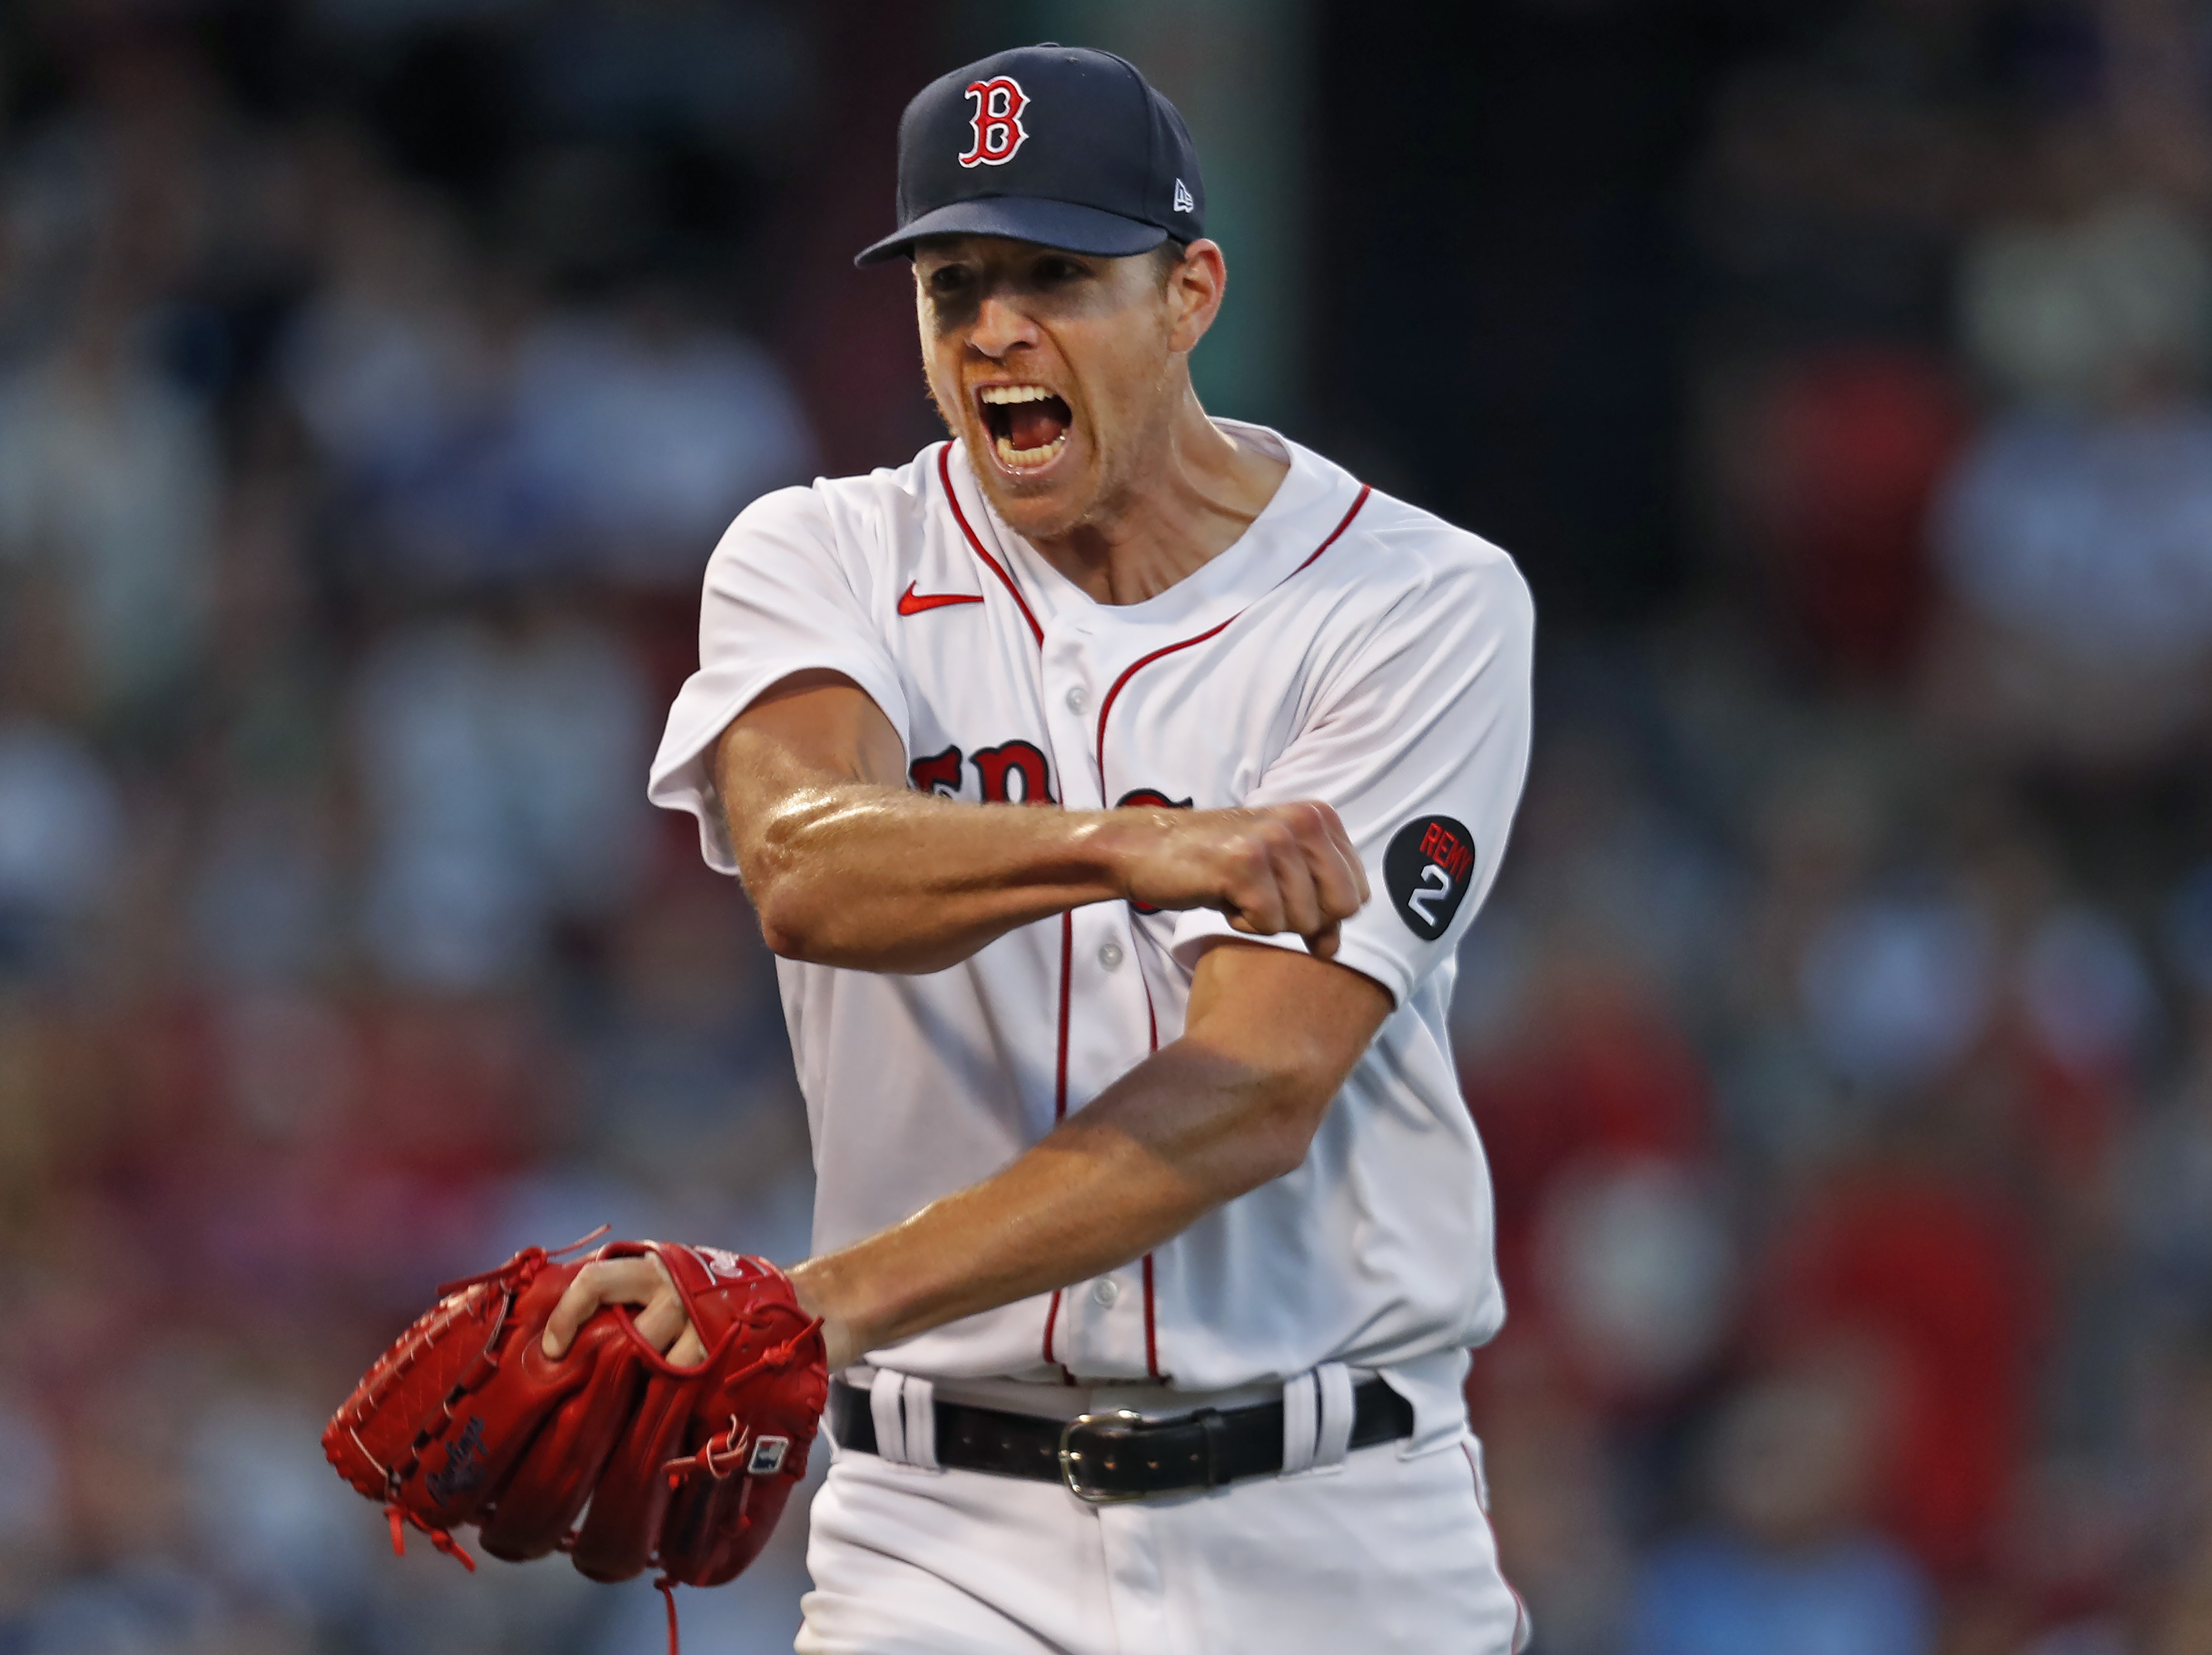 The Recorder - Red Sox top White Sox 11-4 on Patriots' Day with no